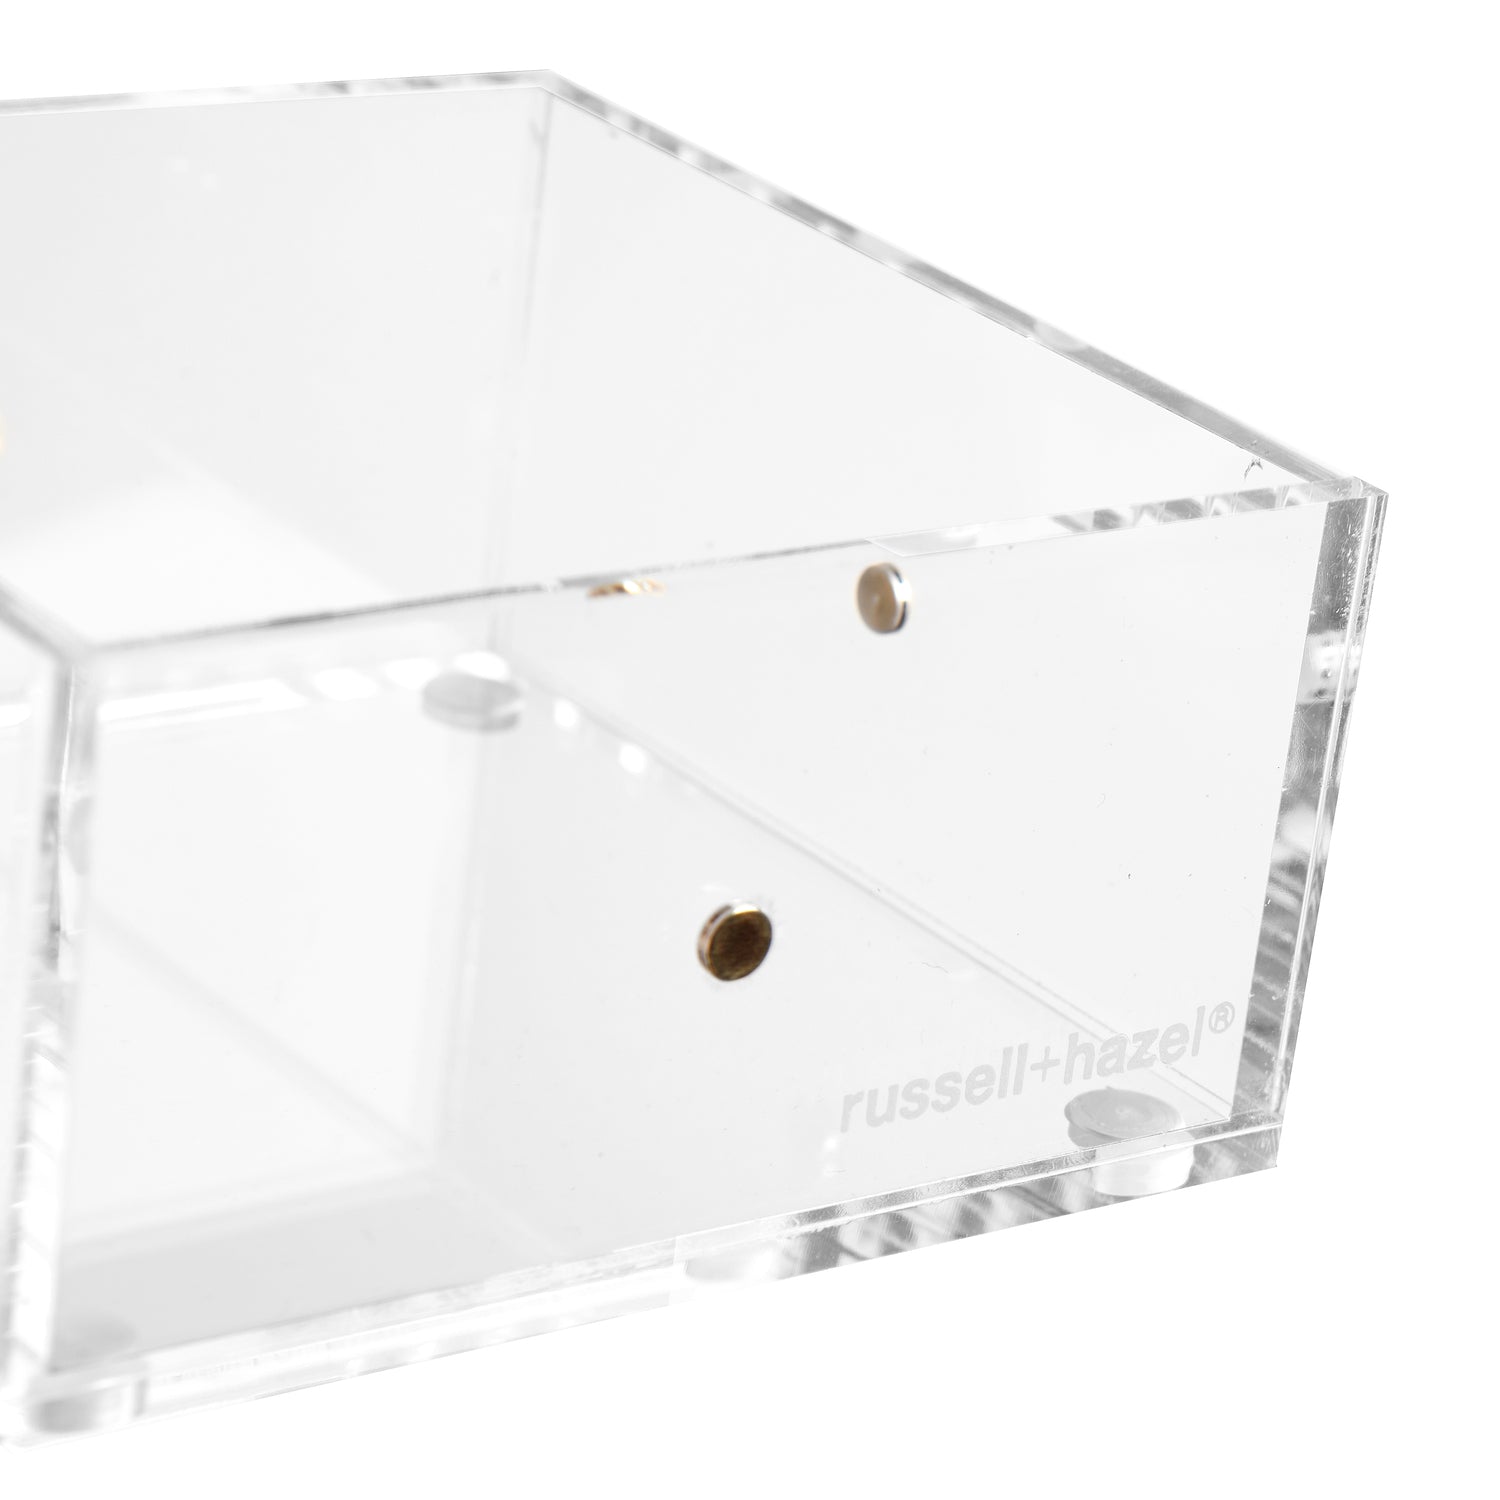 Acrylic Drawer 3 Compartment - Brightroom™